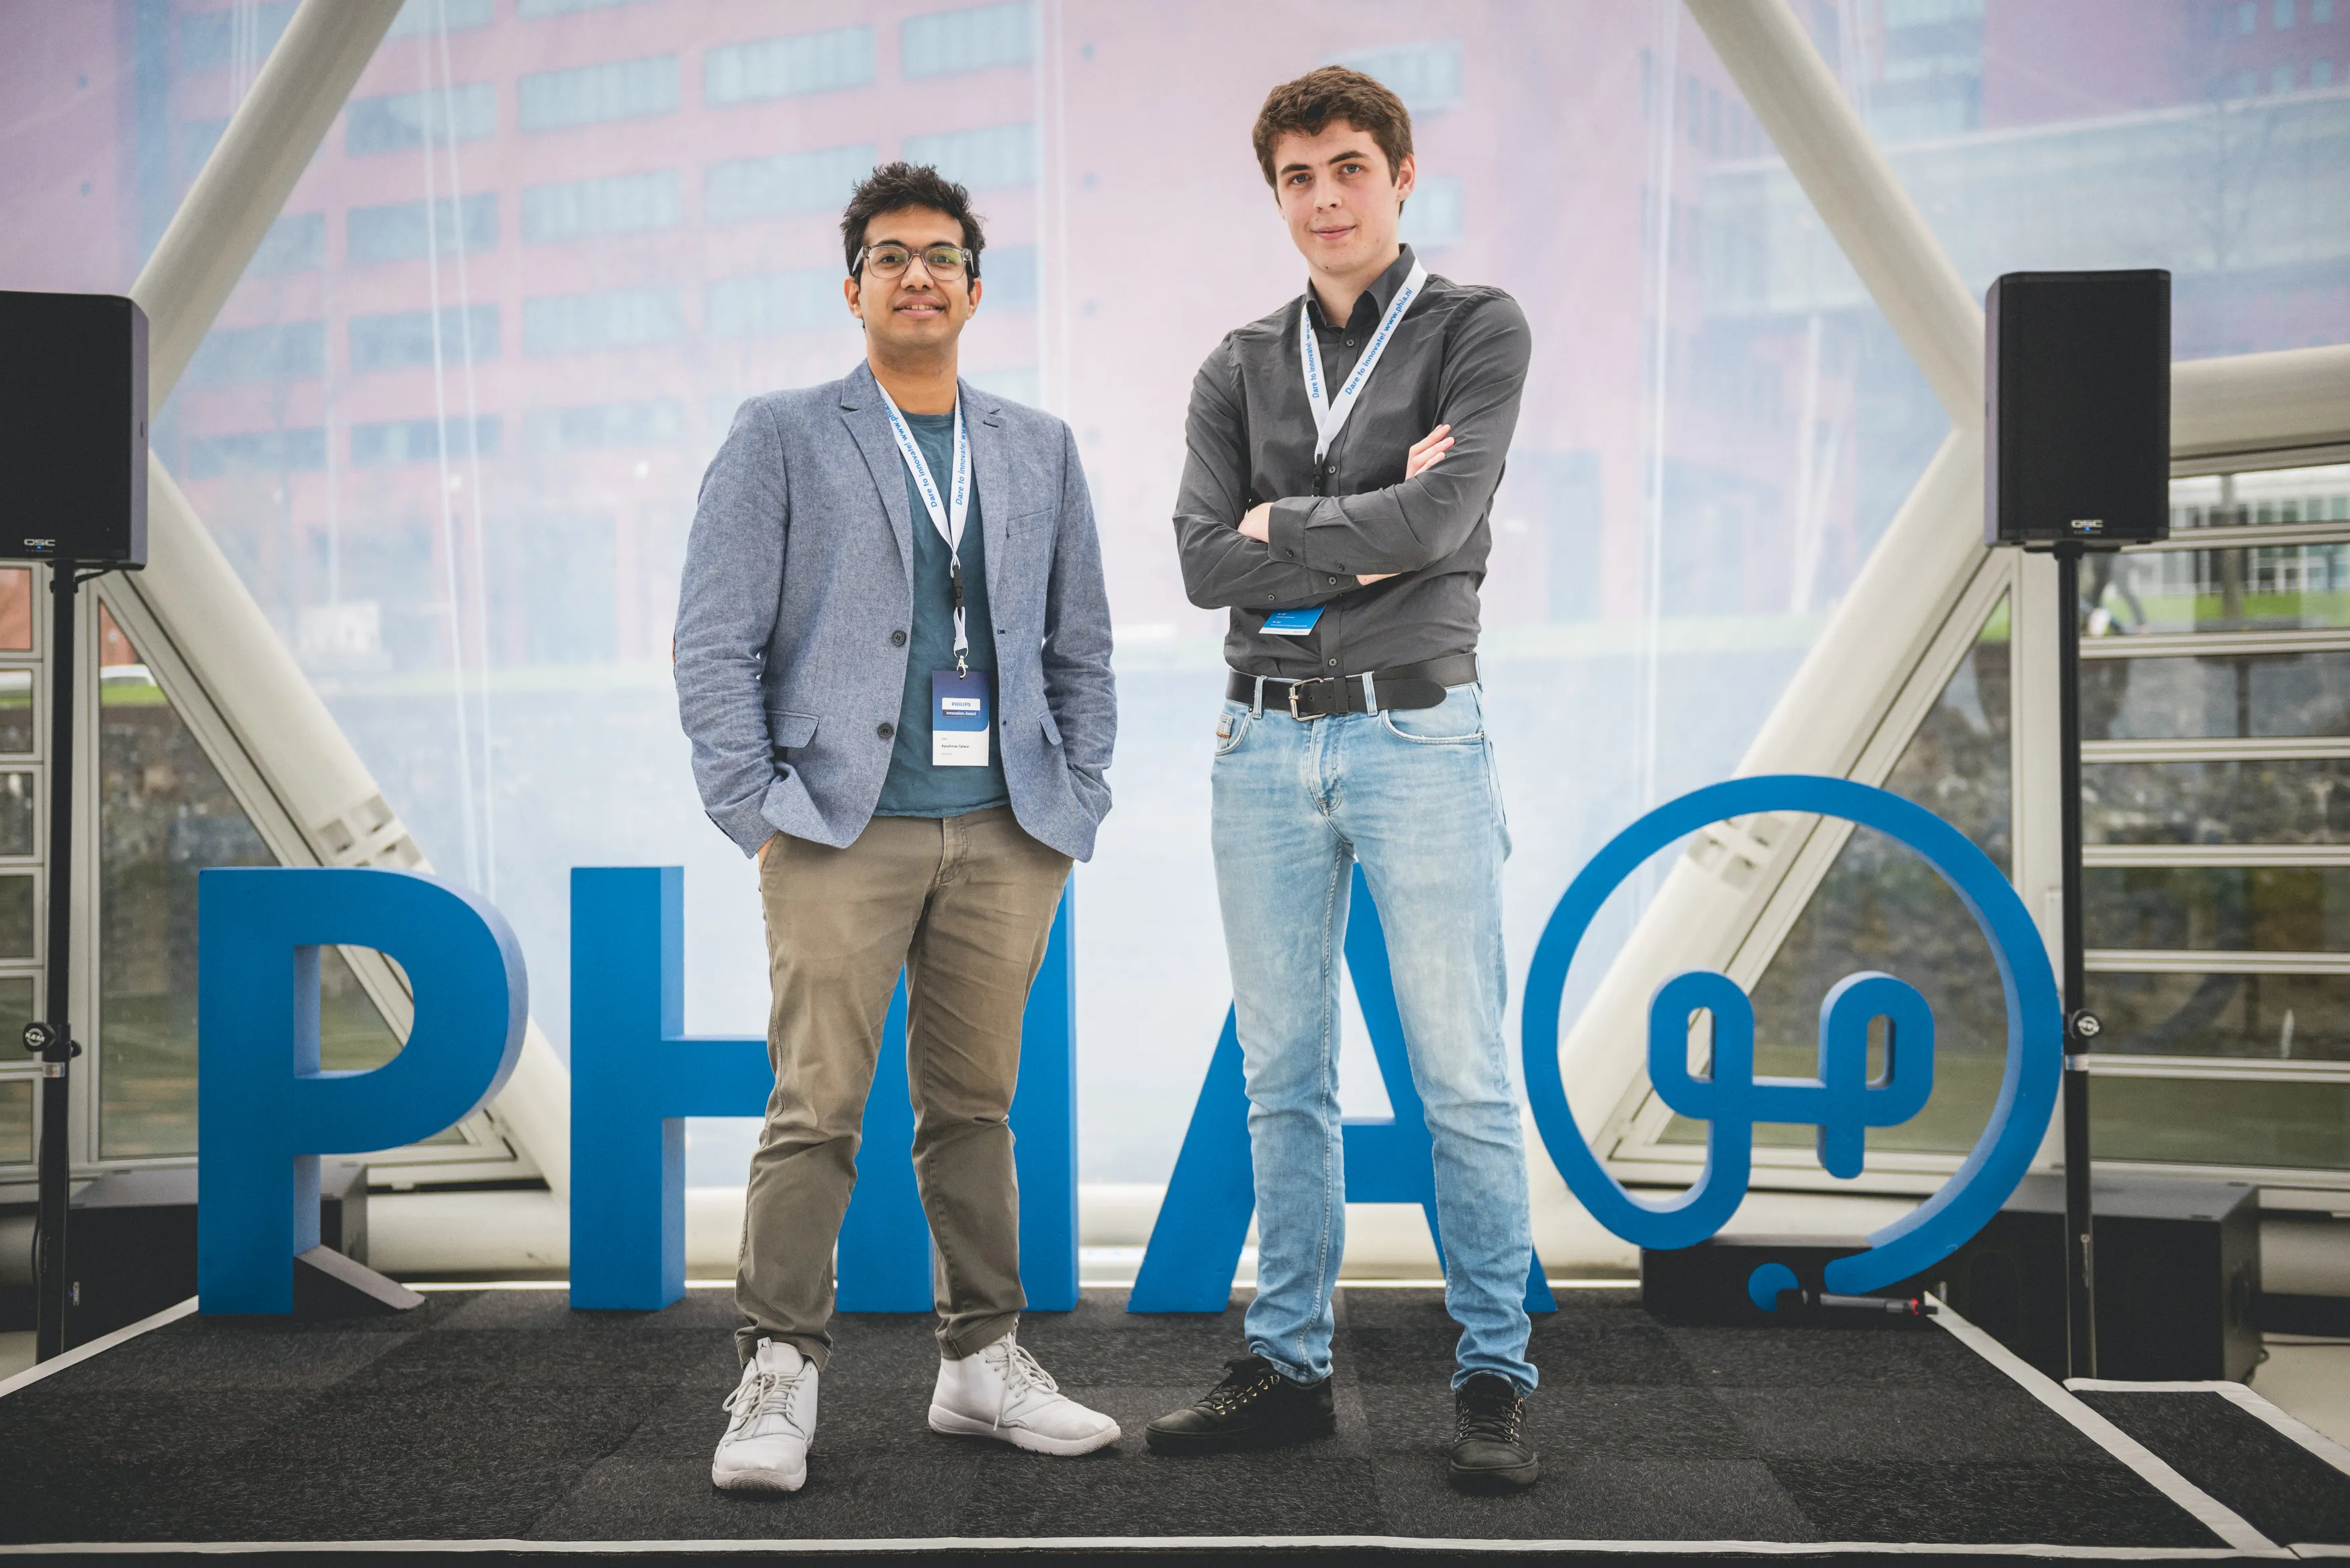 Freek and Ayush on stage with a PHIA logo behind them